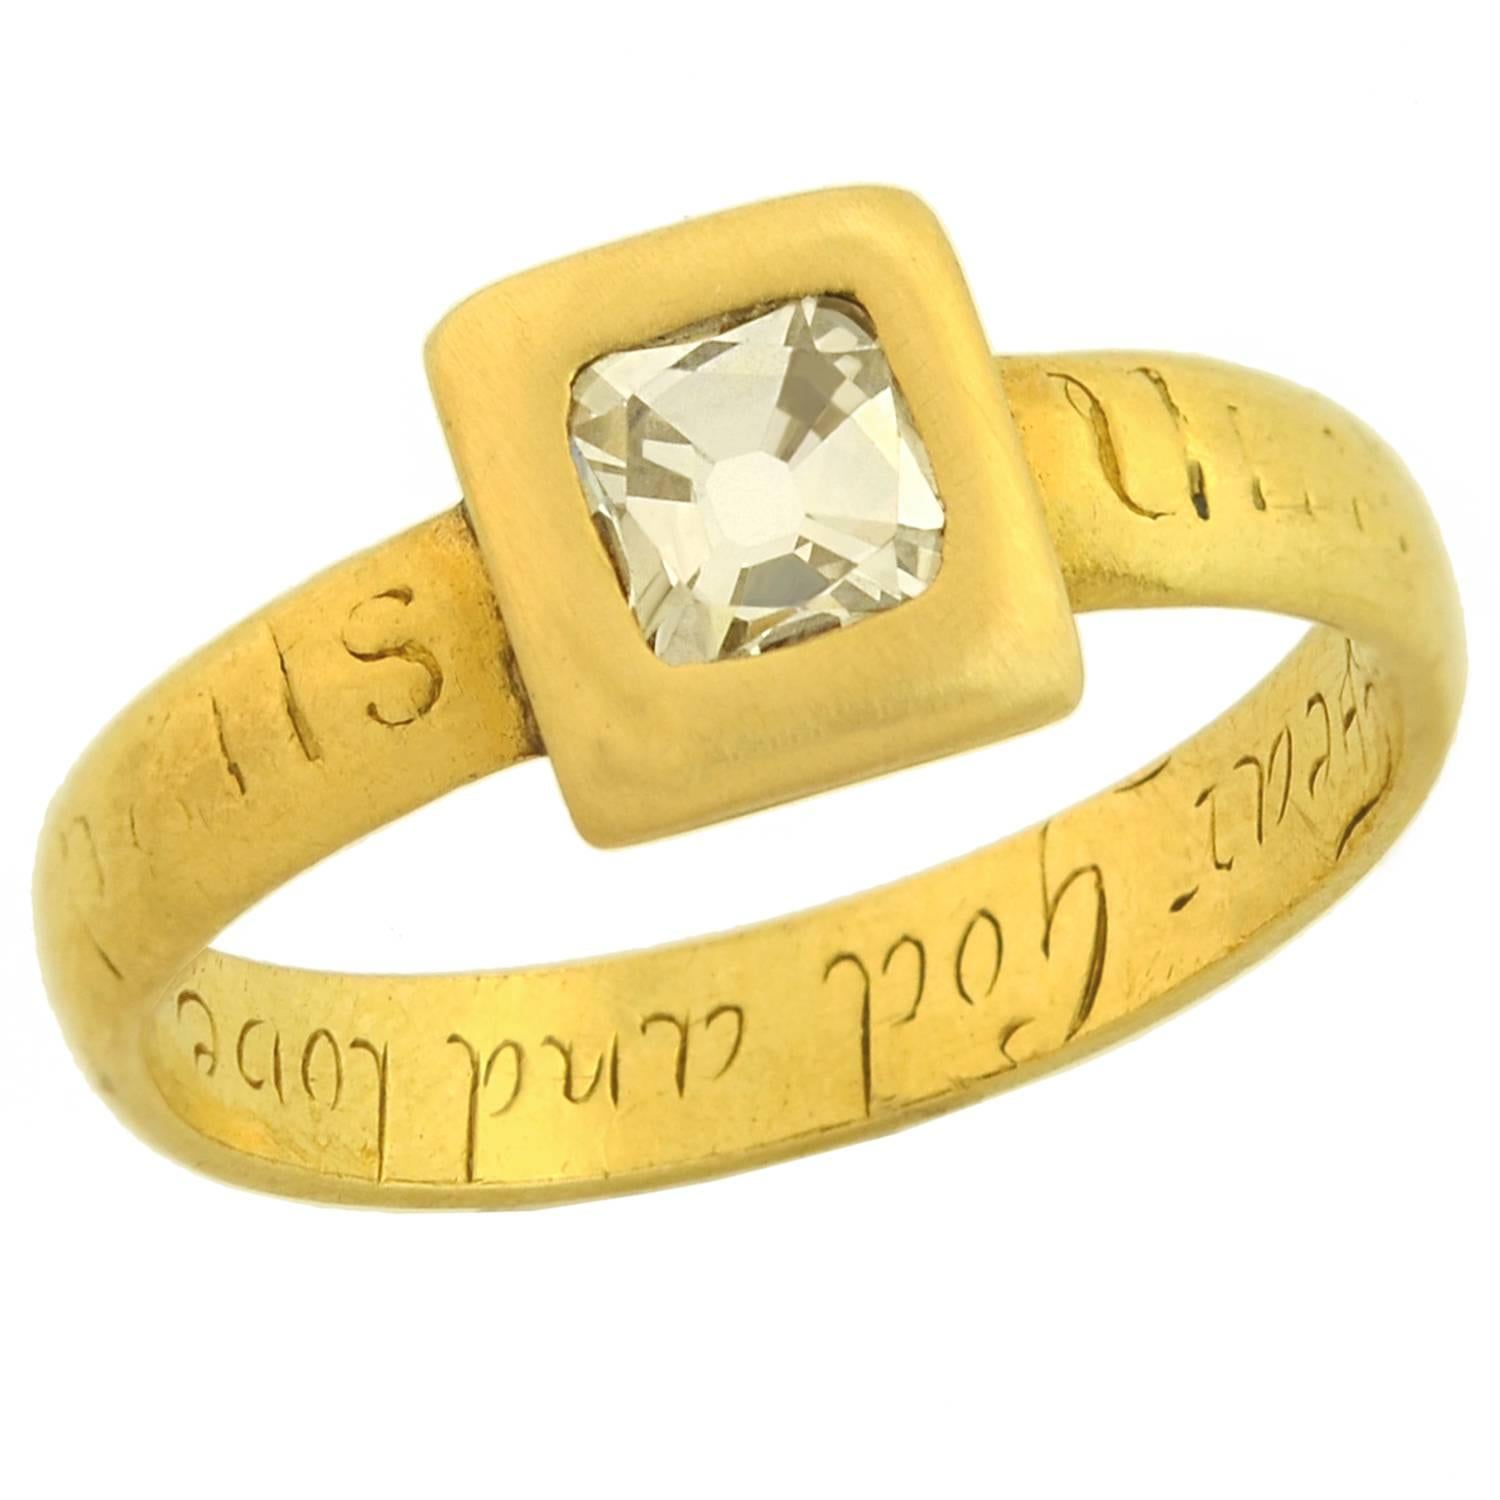 Georgian Table Cut Diamond Inscribed Gold Ring In Good Condition For Sale In Narberth, PA